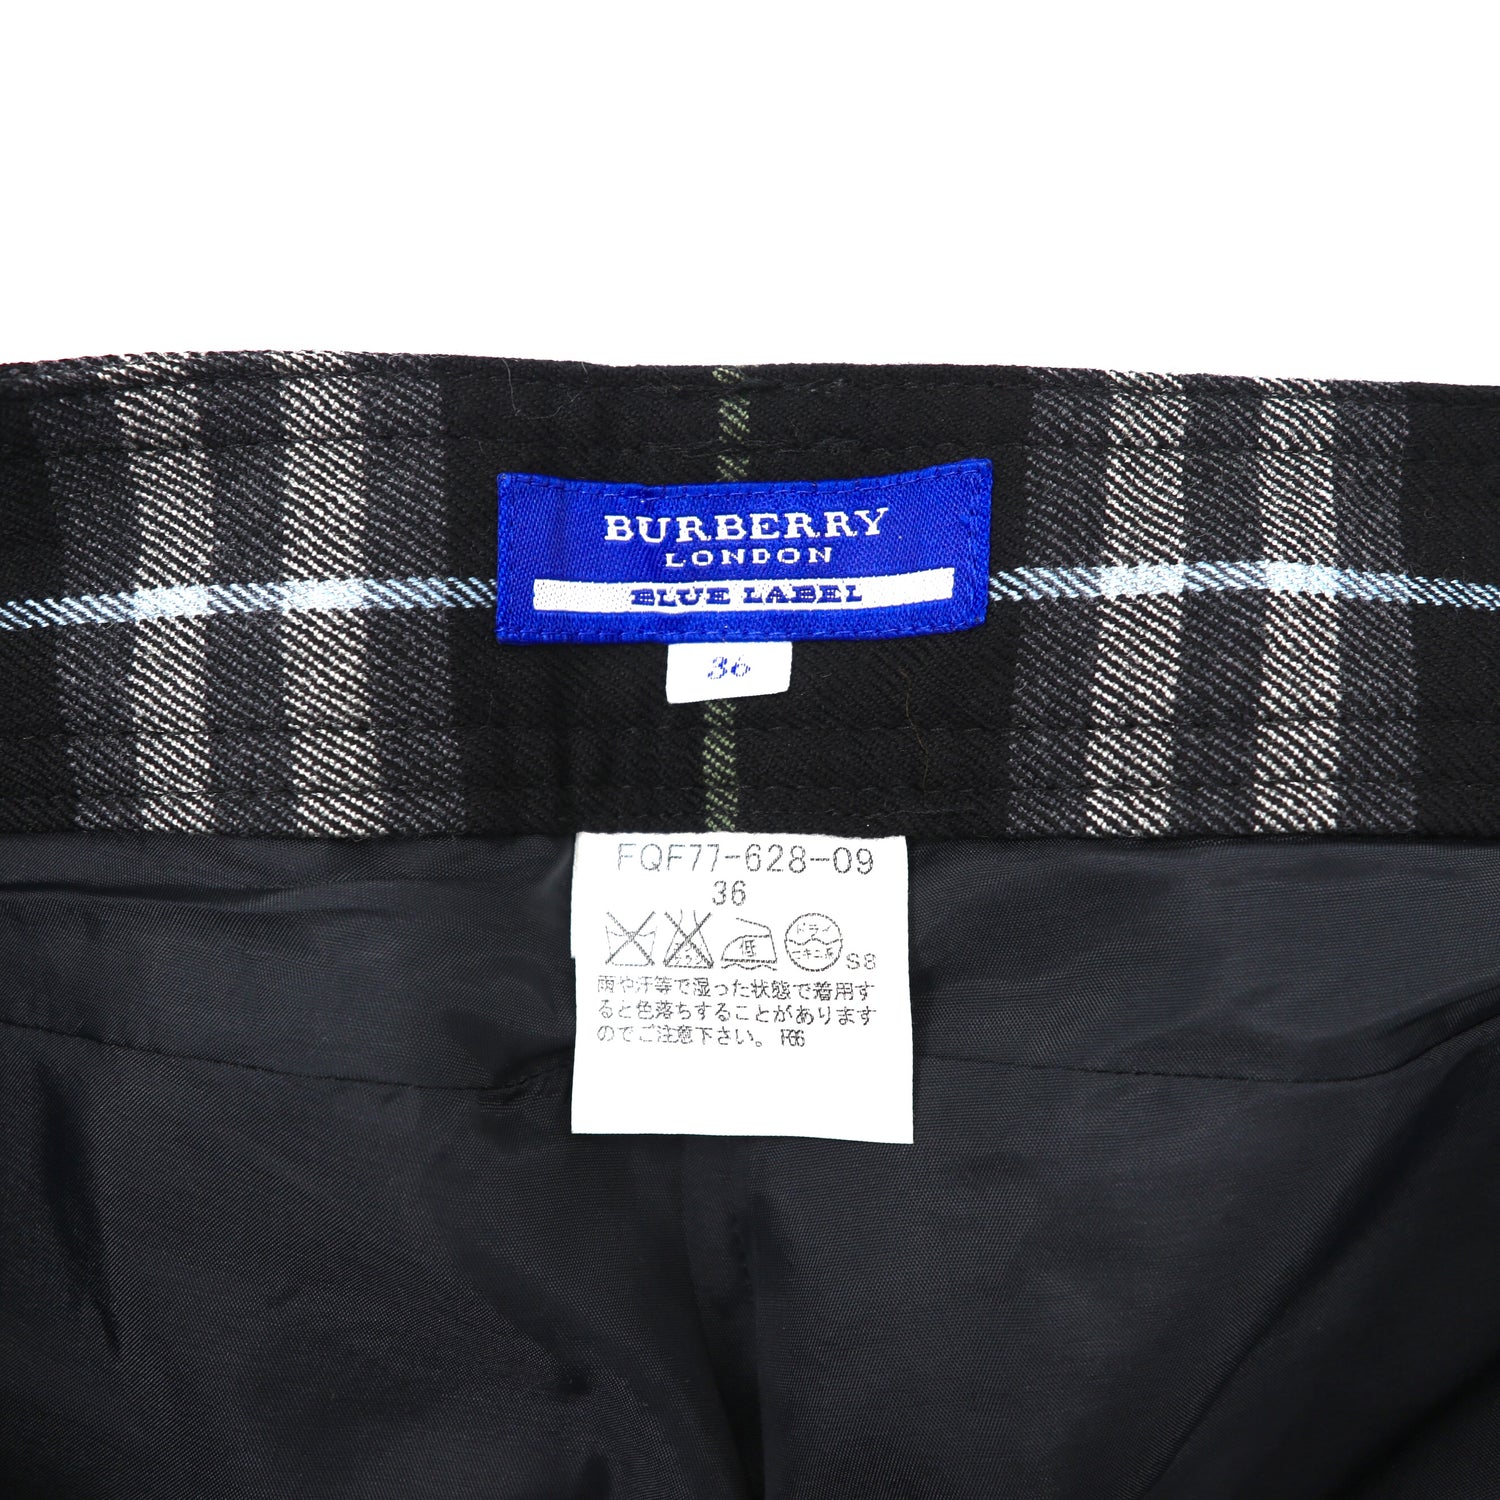 Burberry Blue Label Checked Pants 36 Black Wool Japan Made – 日本